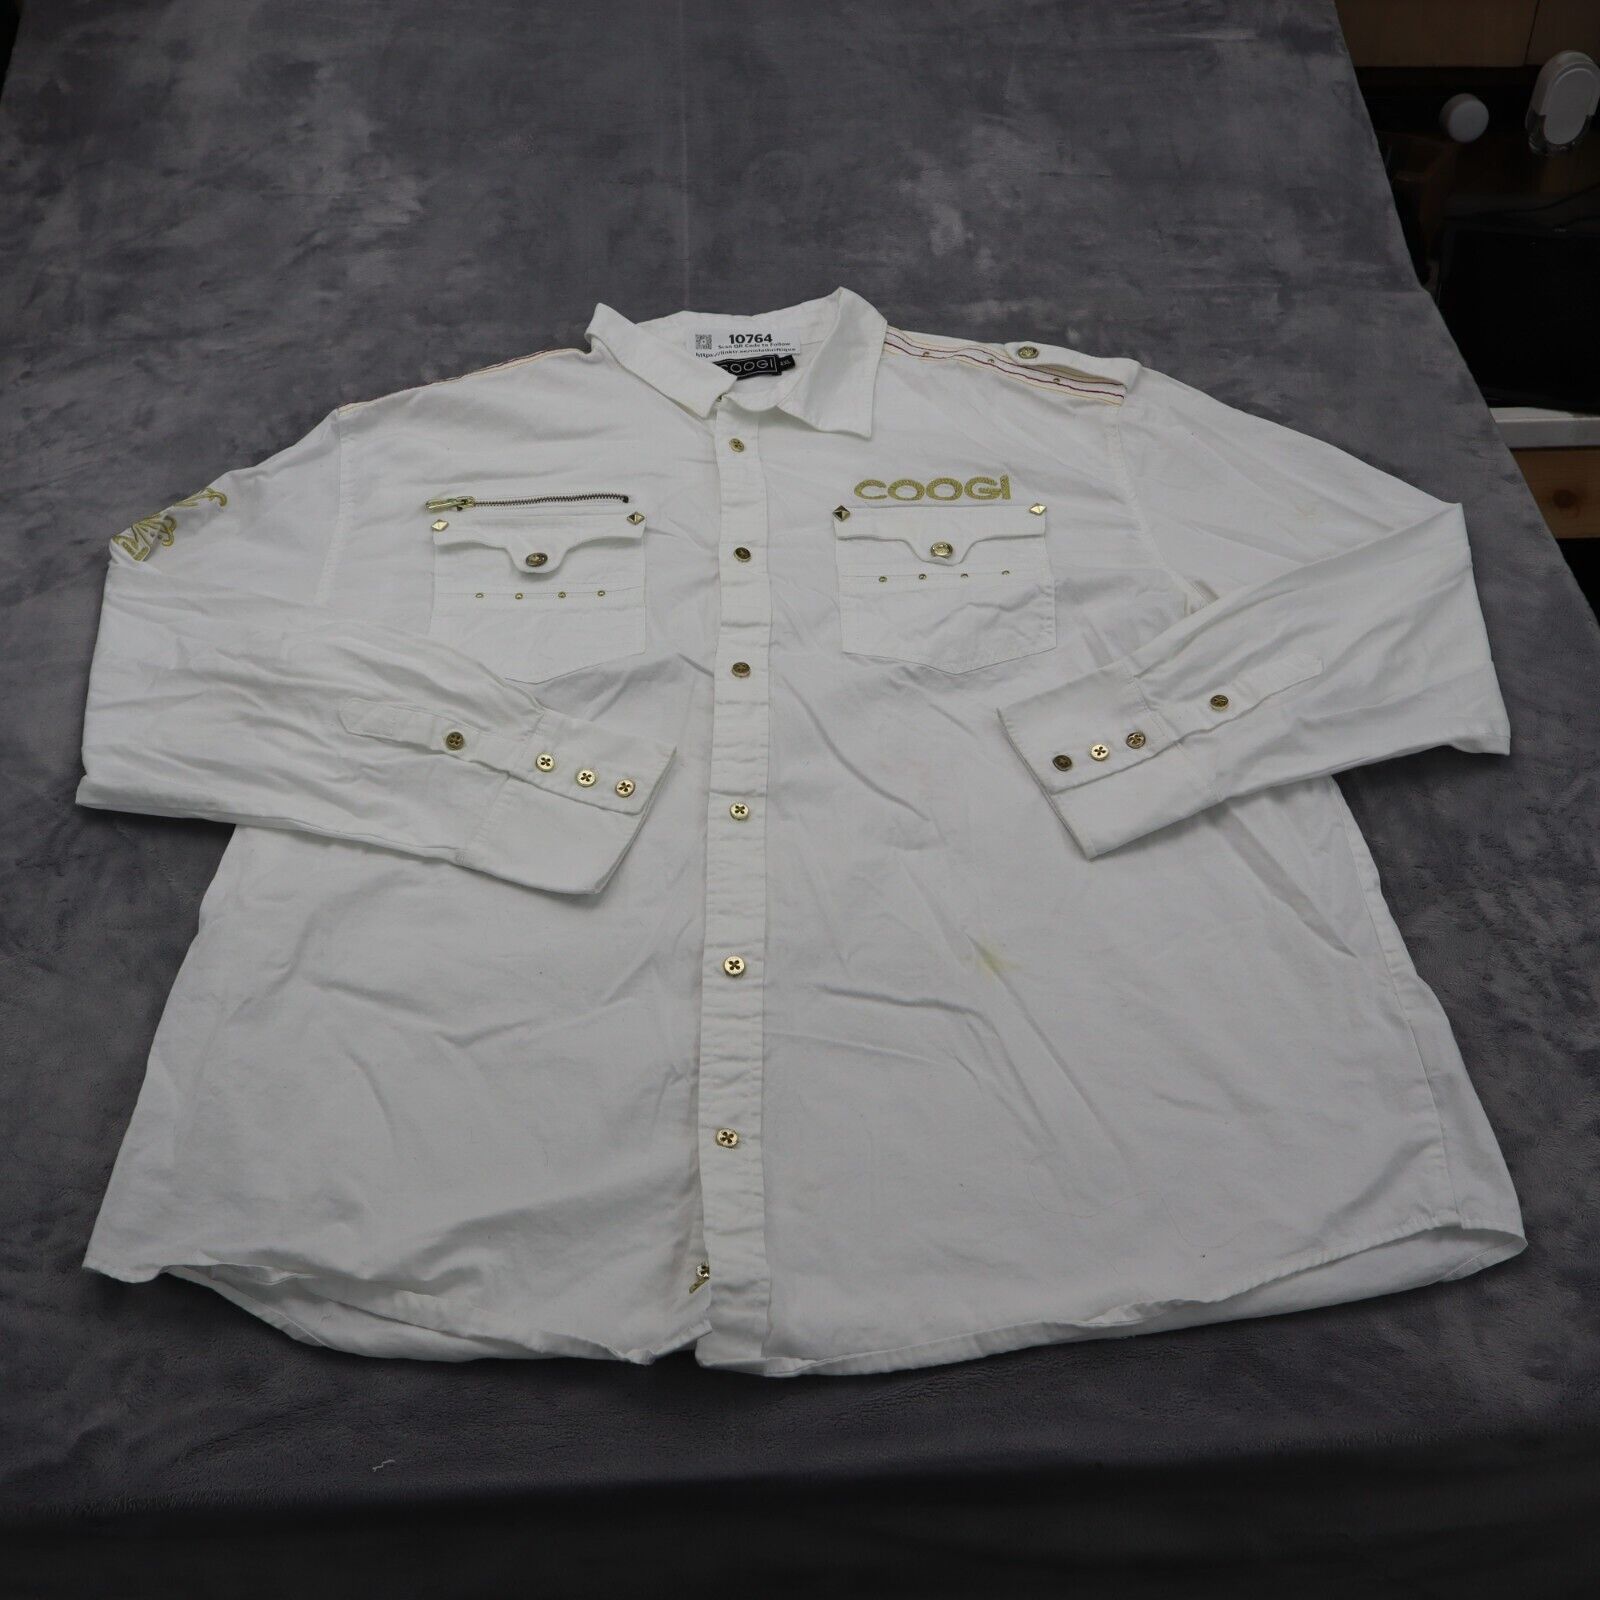 Primary image for Coogi Shirt Men 4XL White Long Sleeve Button Up Casual Gold Embroidery Accents